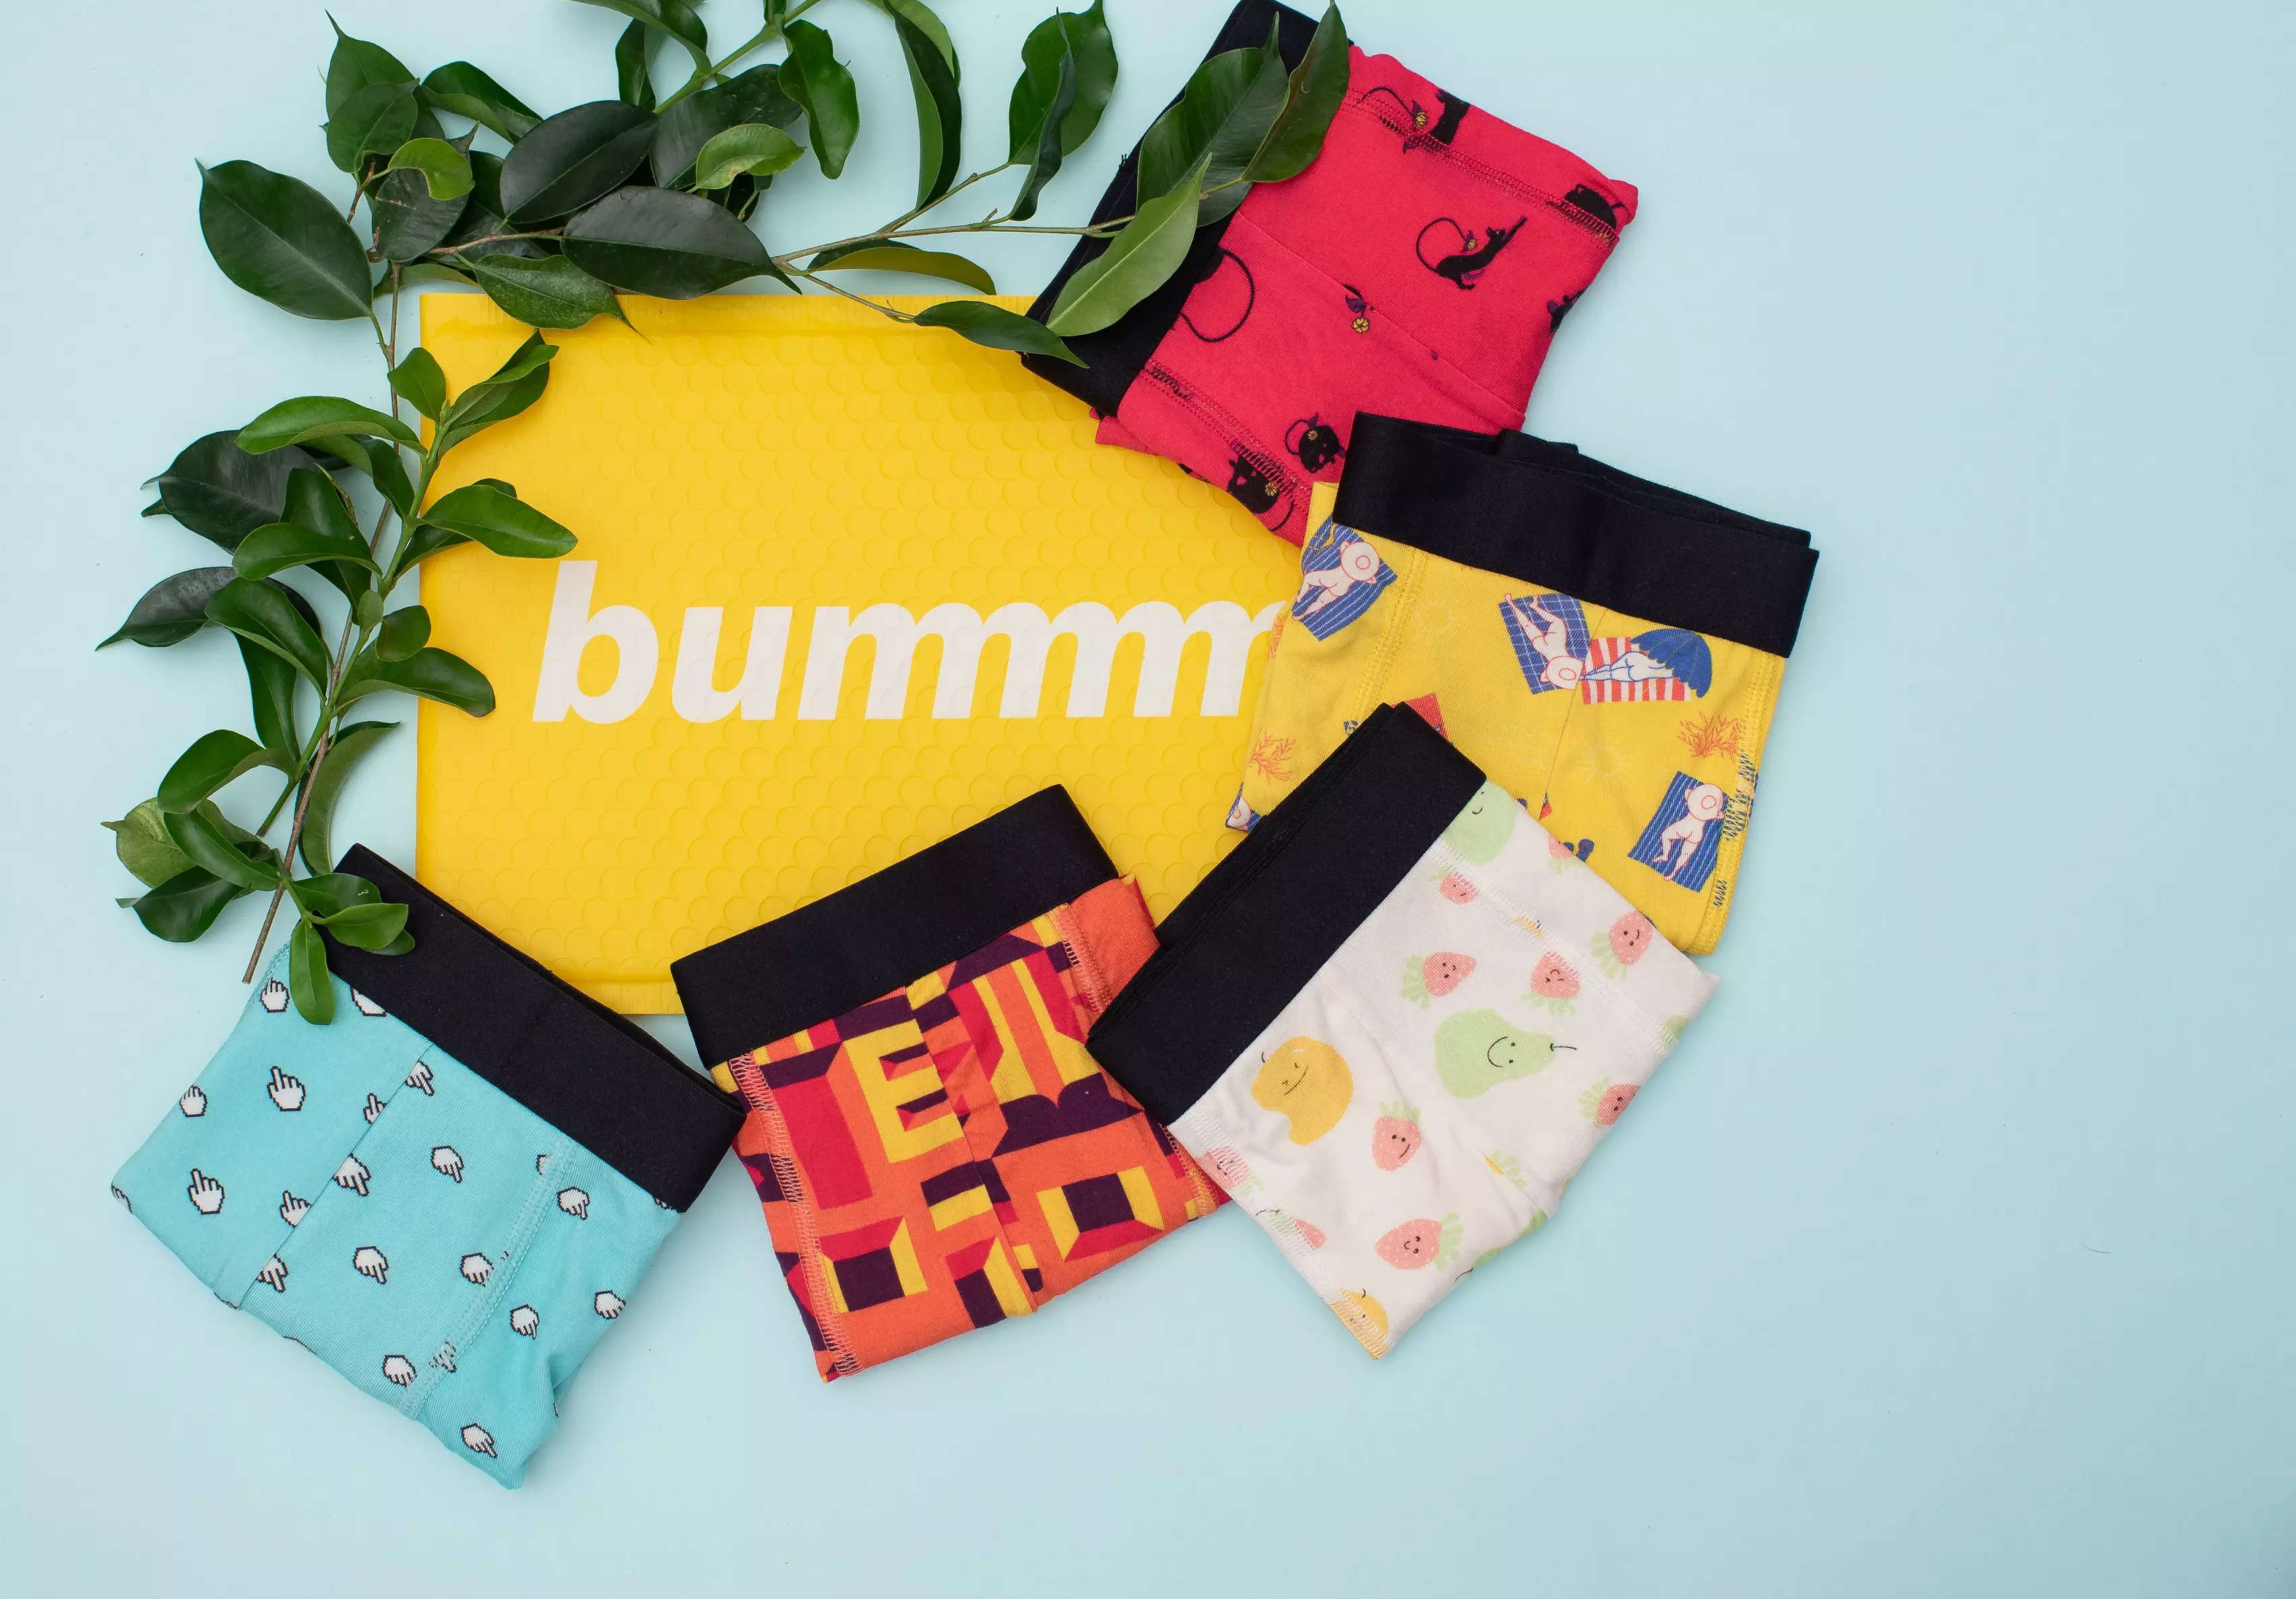 Innerwear brand Bummer in talks to raise USD 1.5 million, eyes Rs 5 cr monthly revenue by end of 2022